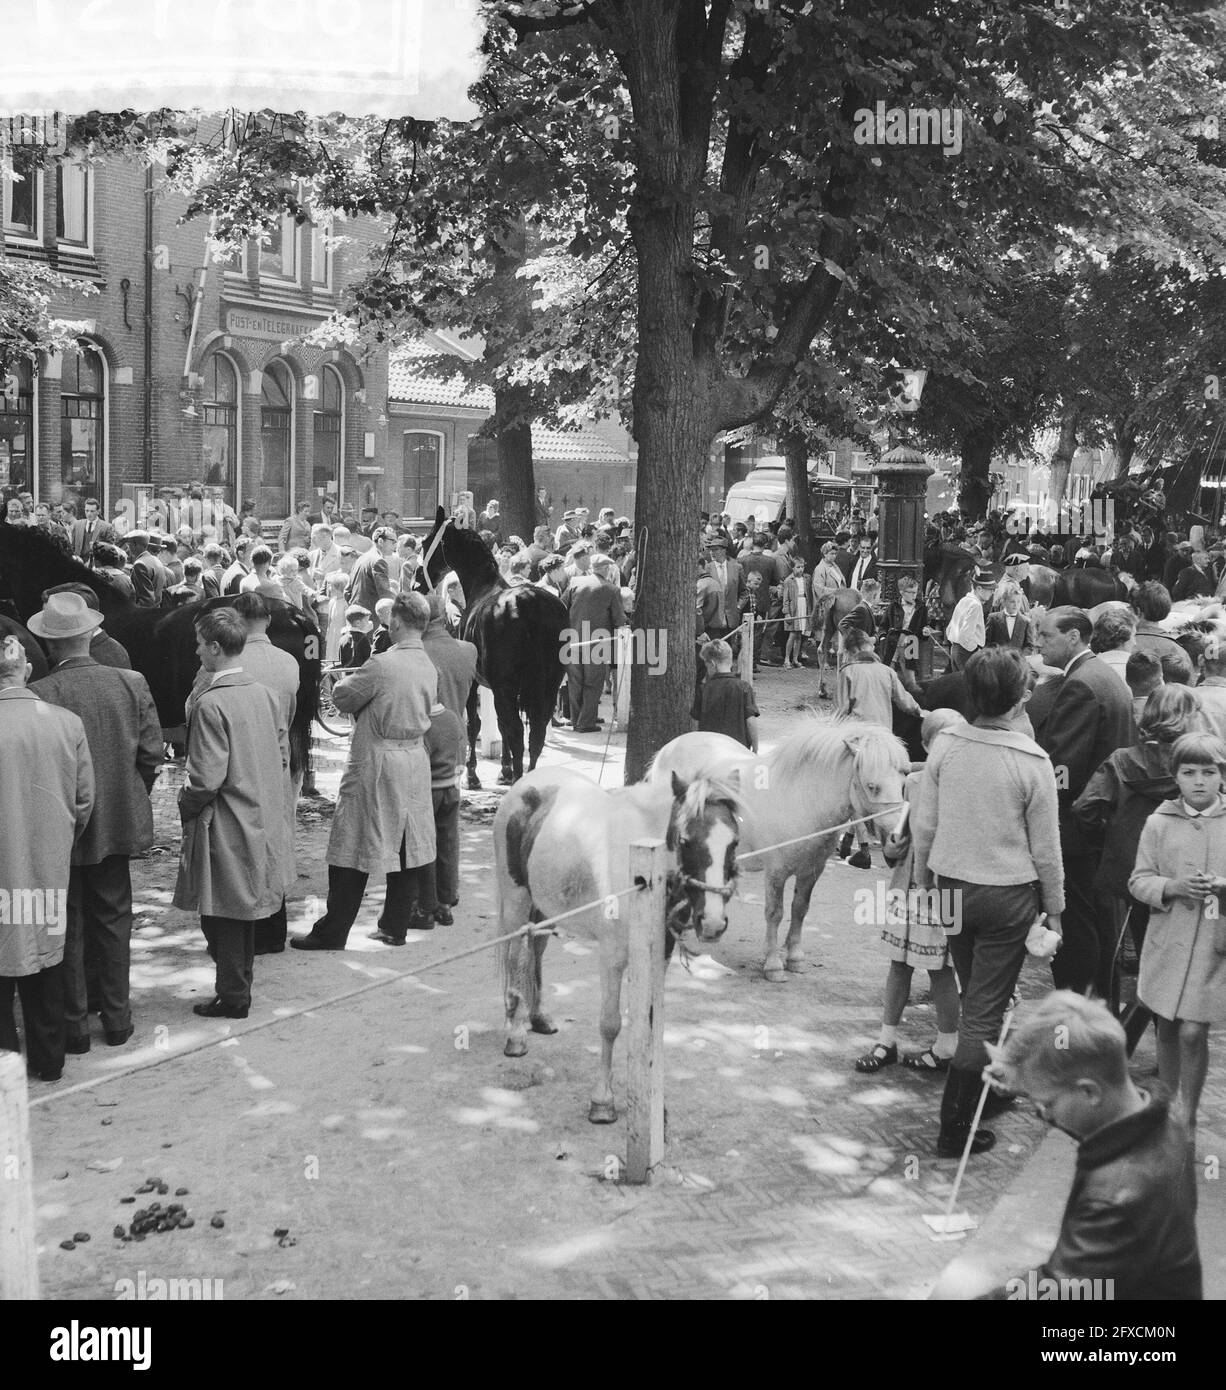 Horse market in Voorschoten, July 28, 1961, markets, horses, The Netherlands, 20th century press agency photo, news to remember, documentary, historic photography 1945-1990, visual stories, human history of the Twentieth Century, capturing moments in time Stock Photo